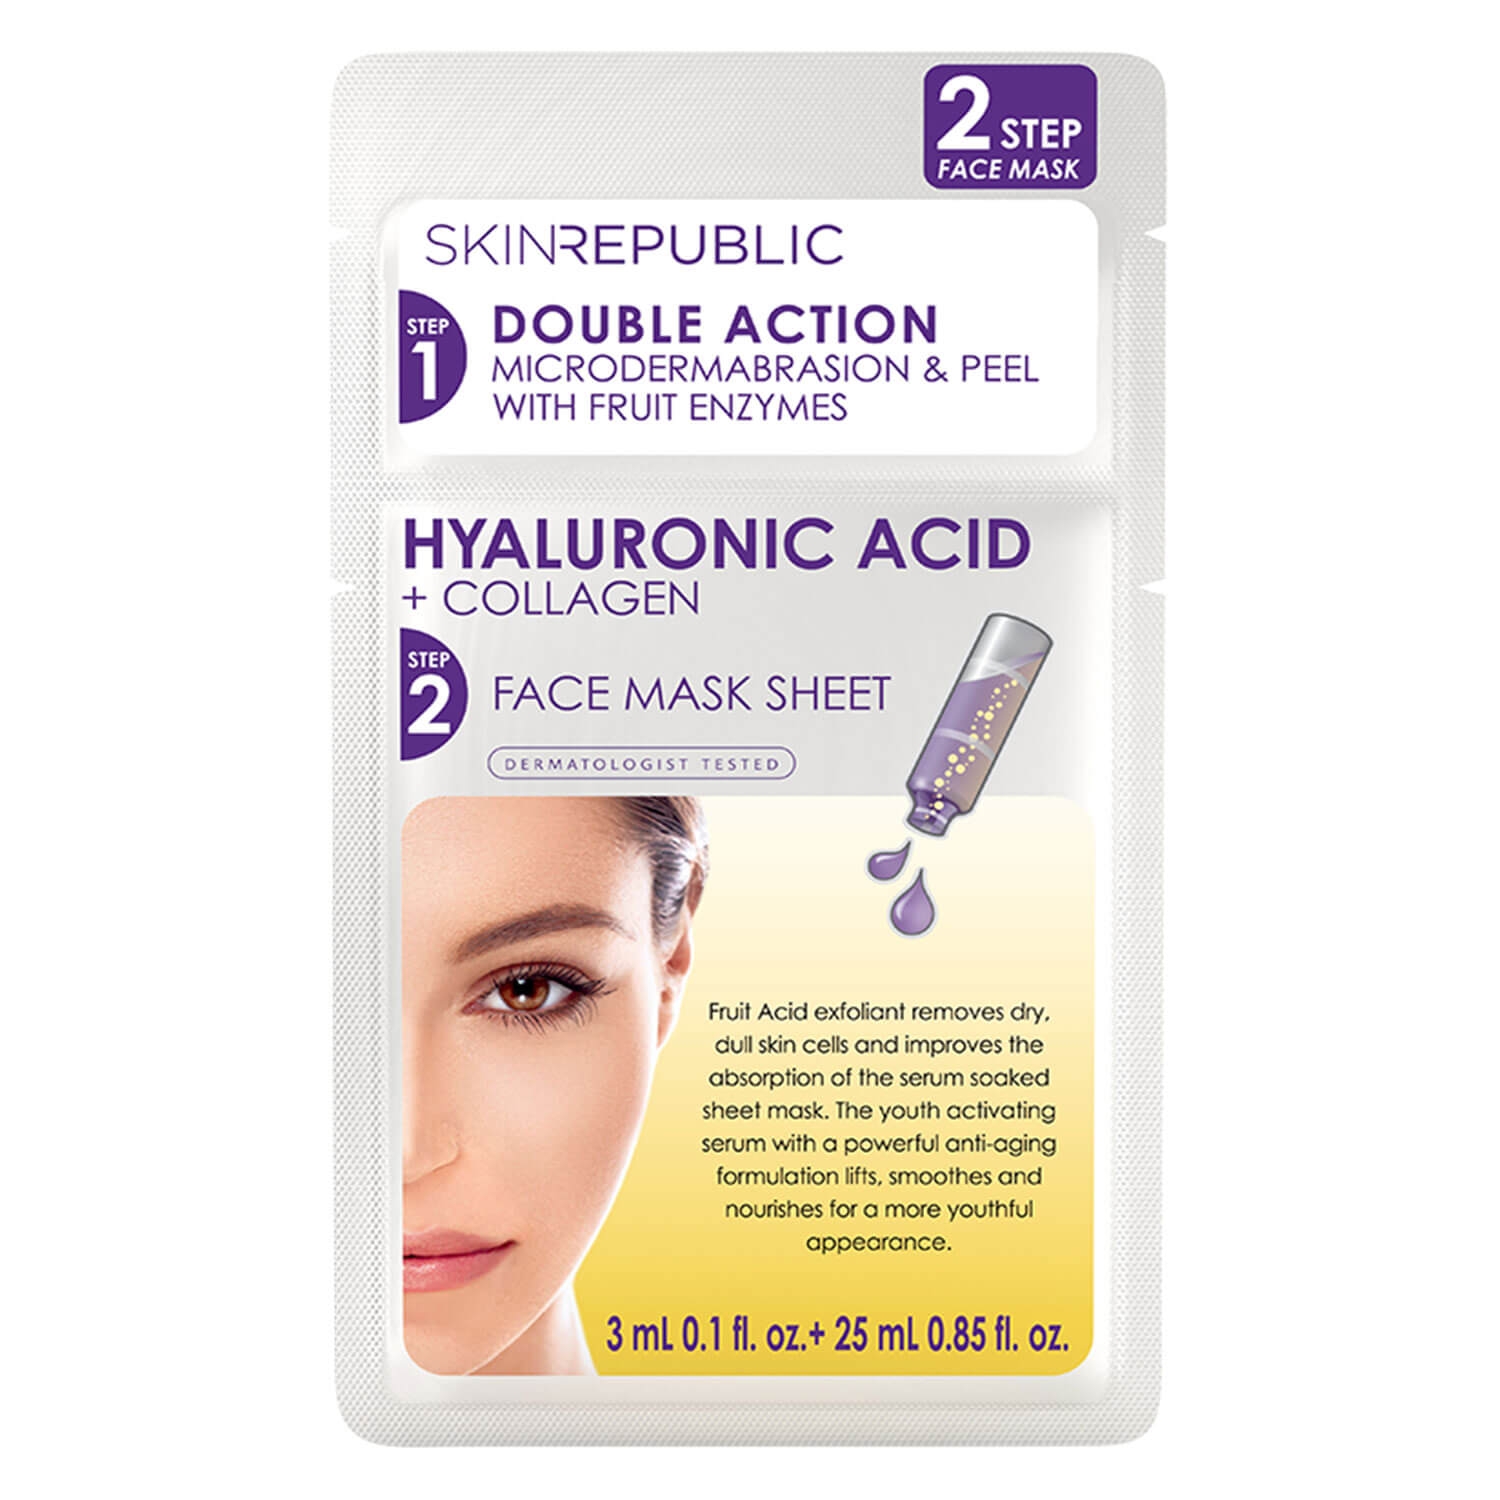 Product image from Skin Republic - 2 Step Hyaluronic Acid + Collagen Face Mask